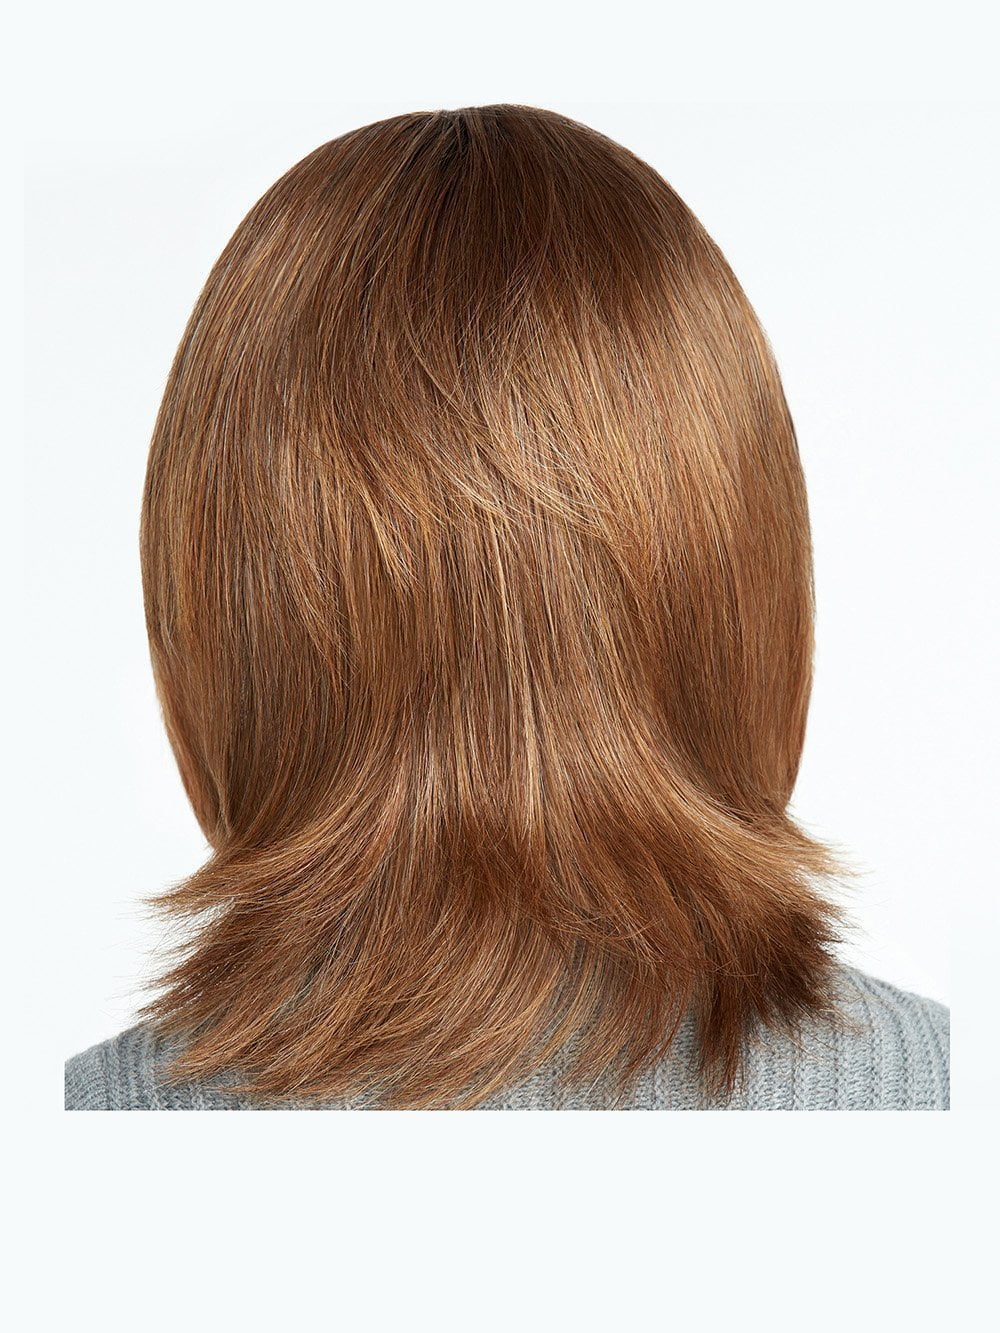 SS11/29 SHADED NUTMEG | Warm Medium Brown Evenly Blended with Ginger Blonde and Dark Roots